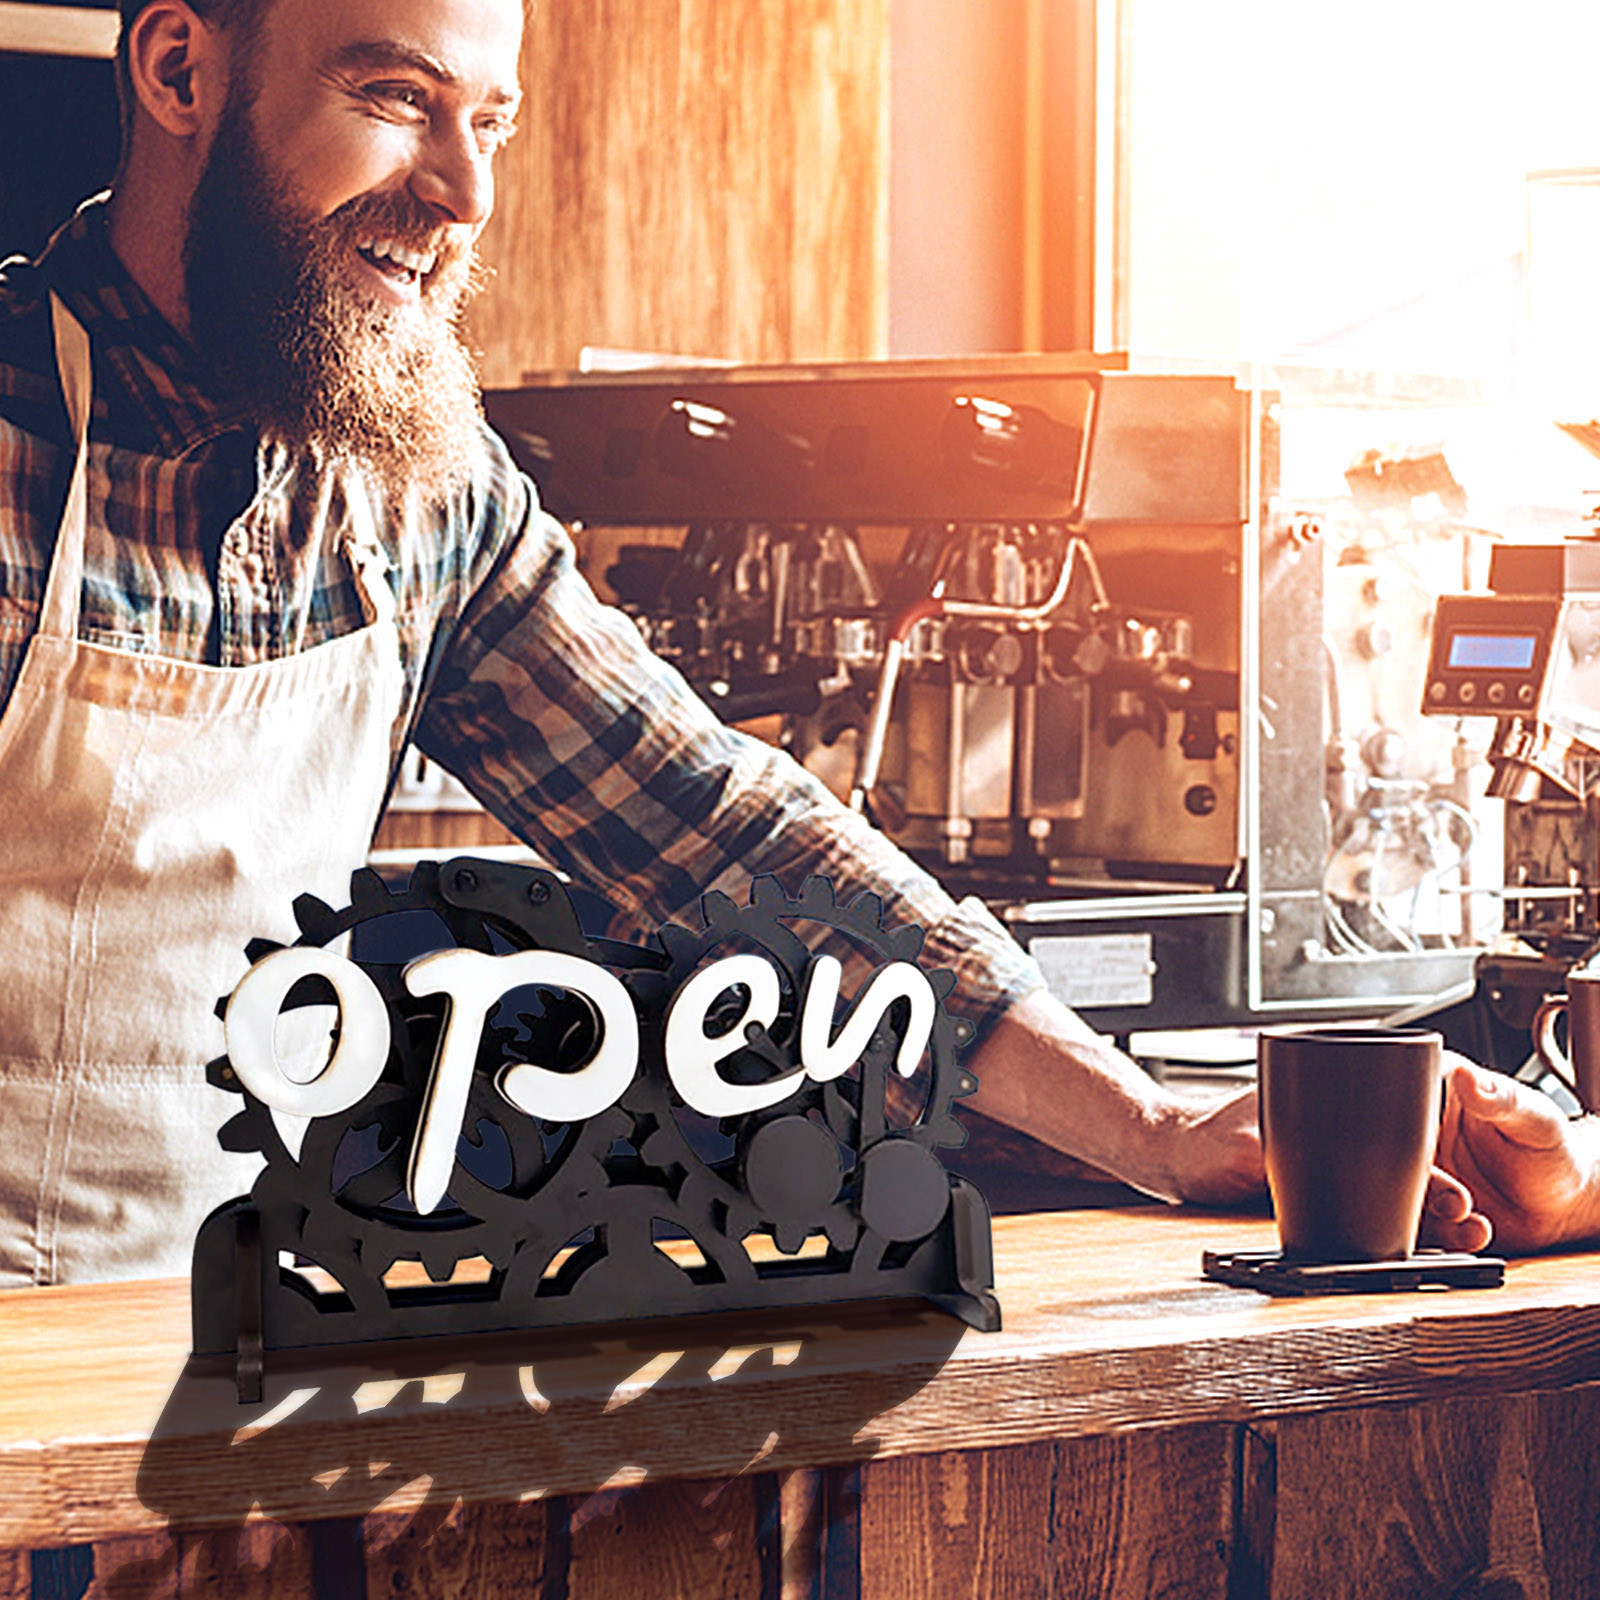 Open-closed Converter,Open Closed Sign Board, Wooden Gear Mechanism Convertible Open Signs For Business, Manual Mechanical Hanging Open Closed Sign For Business - image 1 of 3